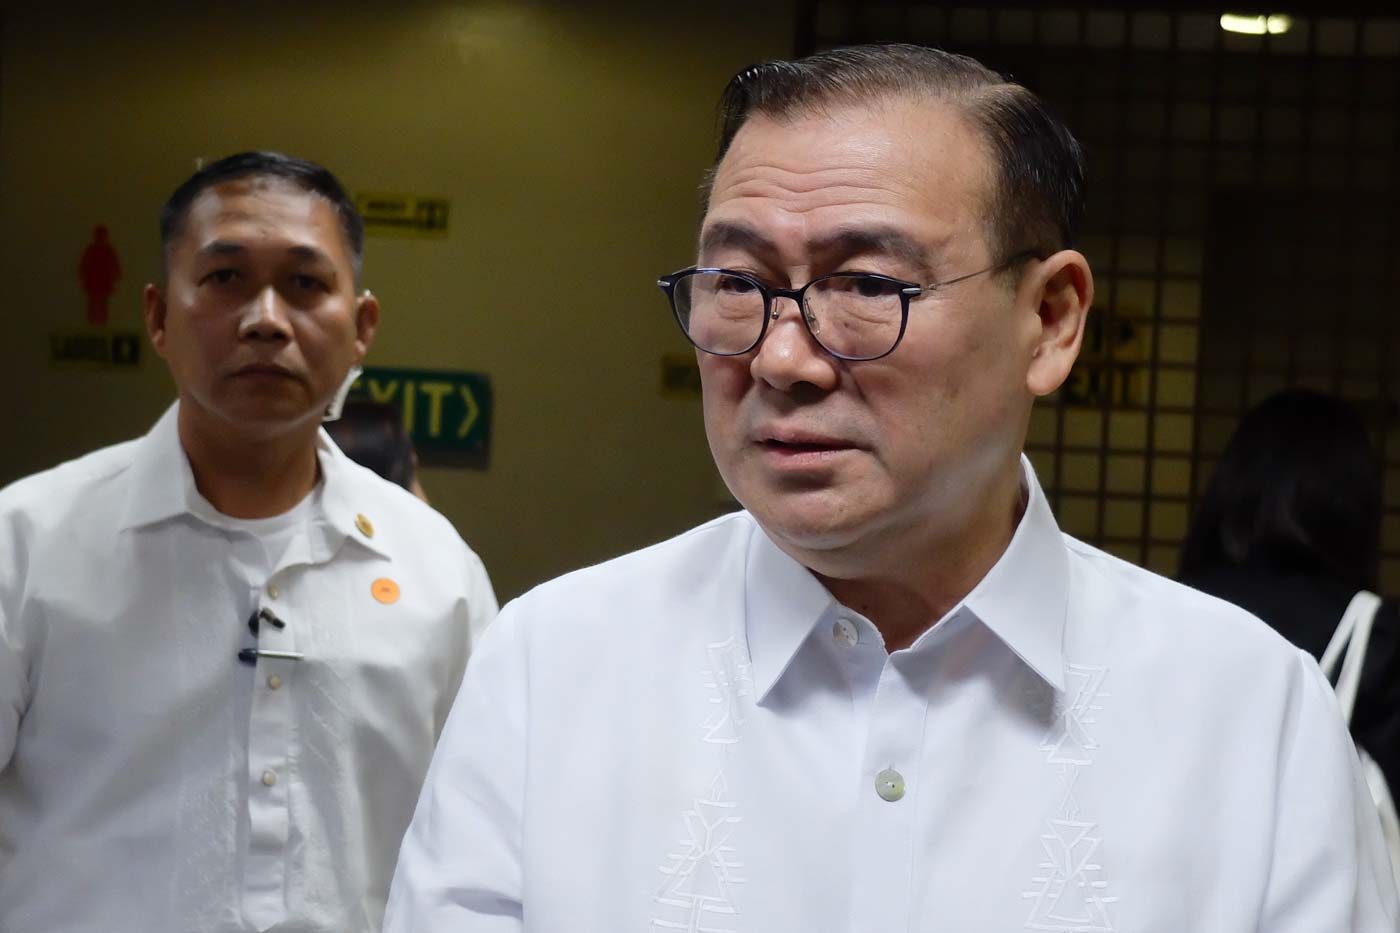 Amid calls for sobriety, Locsin says beat the Ateneo bully